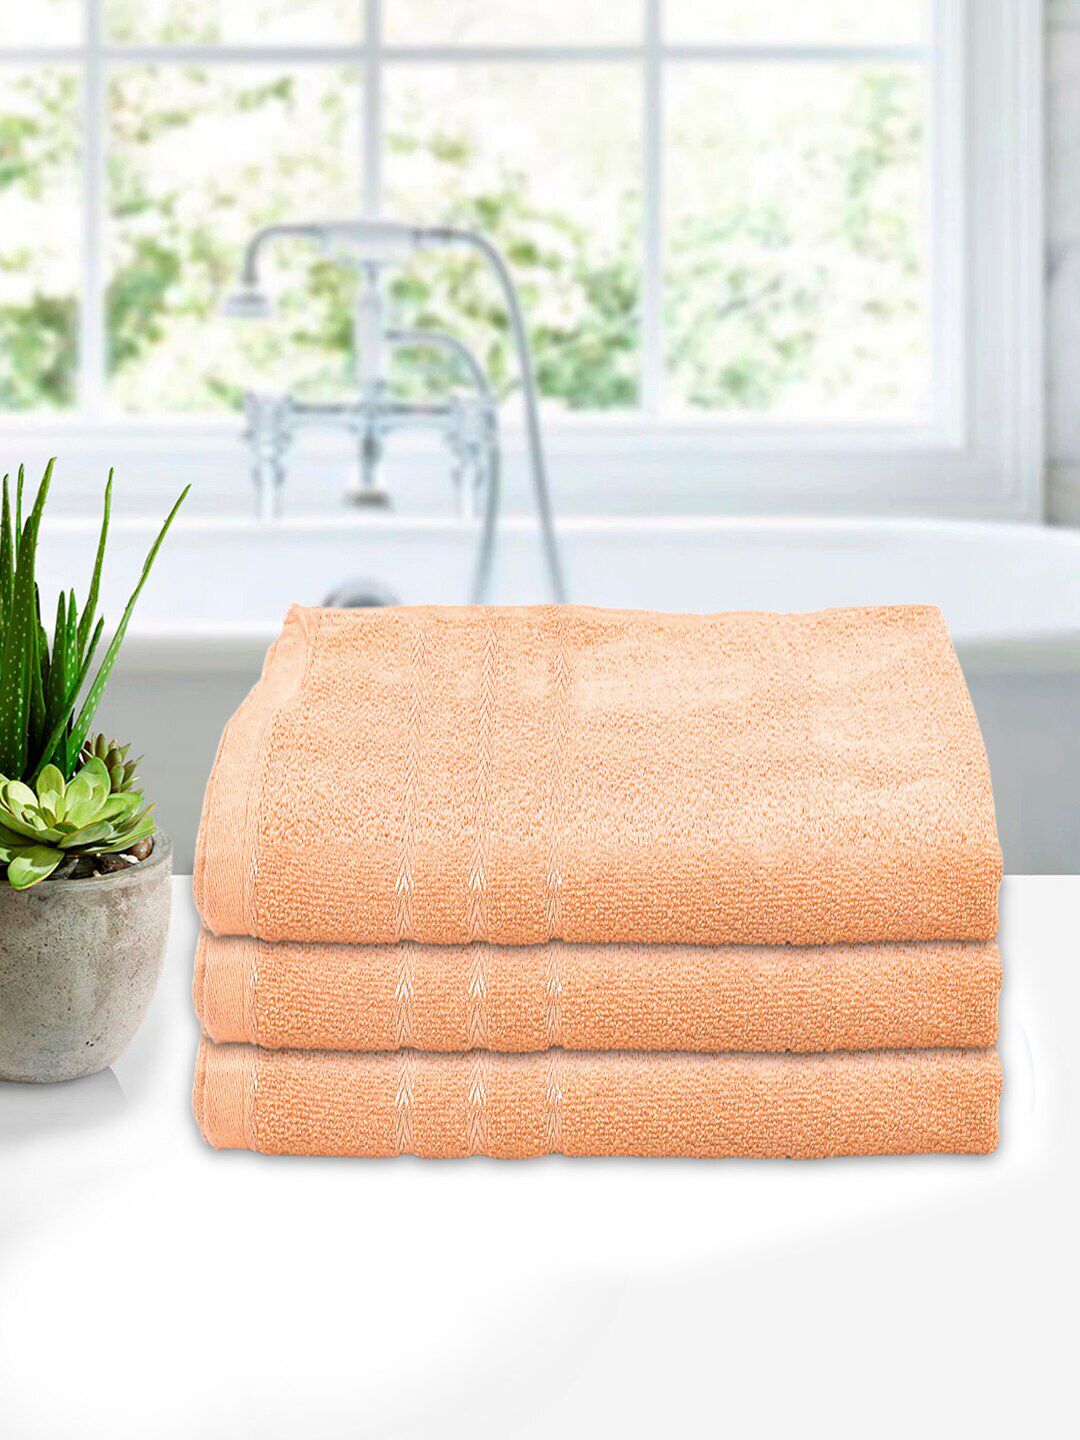 Kuber Industries Unisex Kids Pack of 3 Peach Colored Solid 210 GSM Soft Cotton Bath Towel Price in India